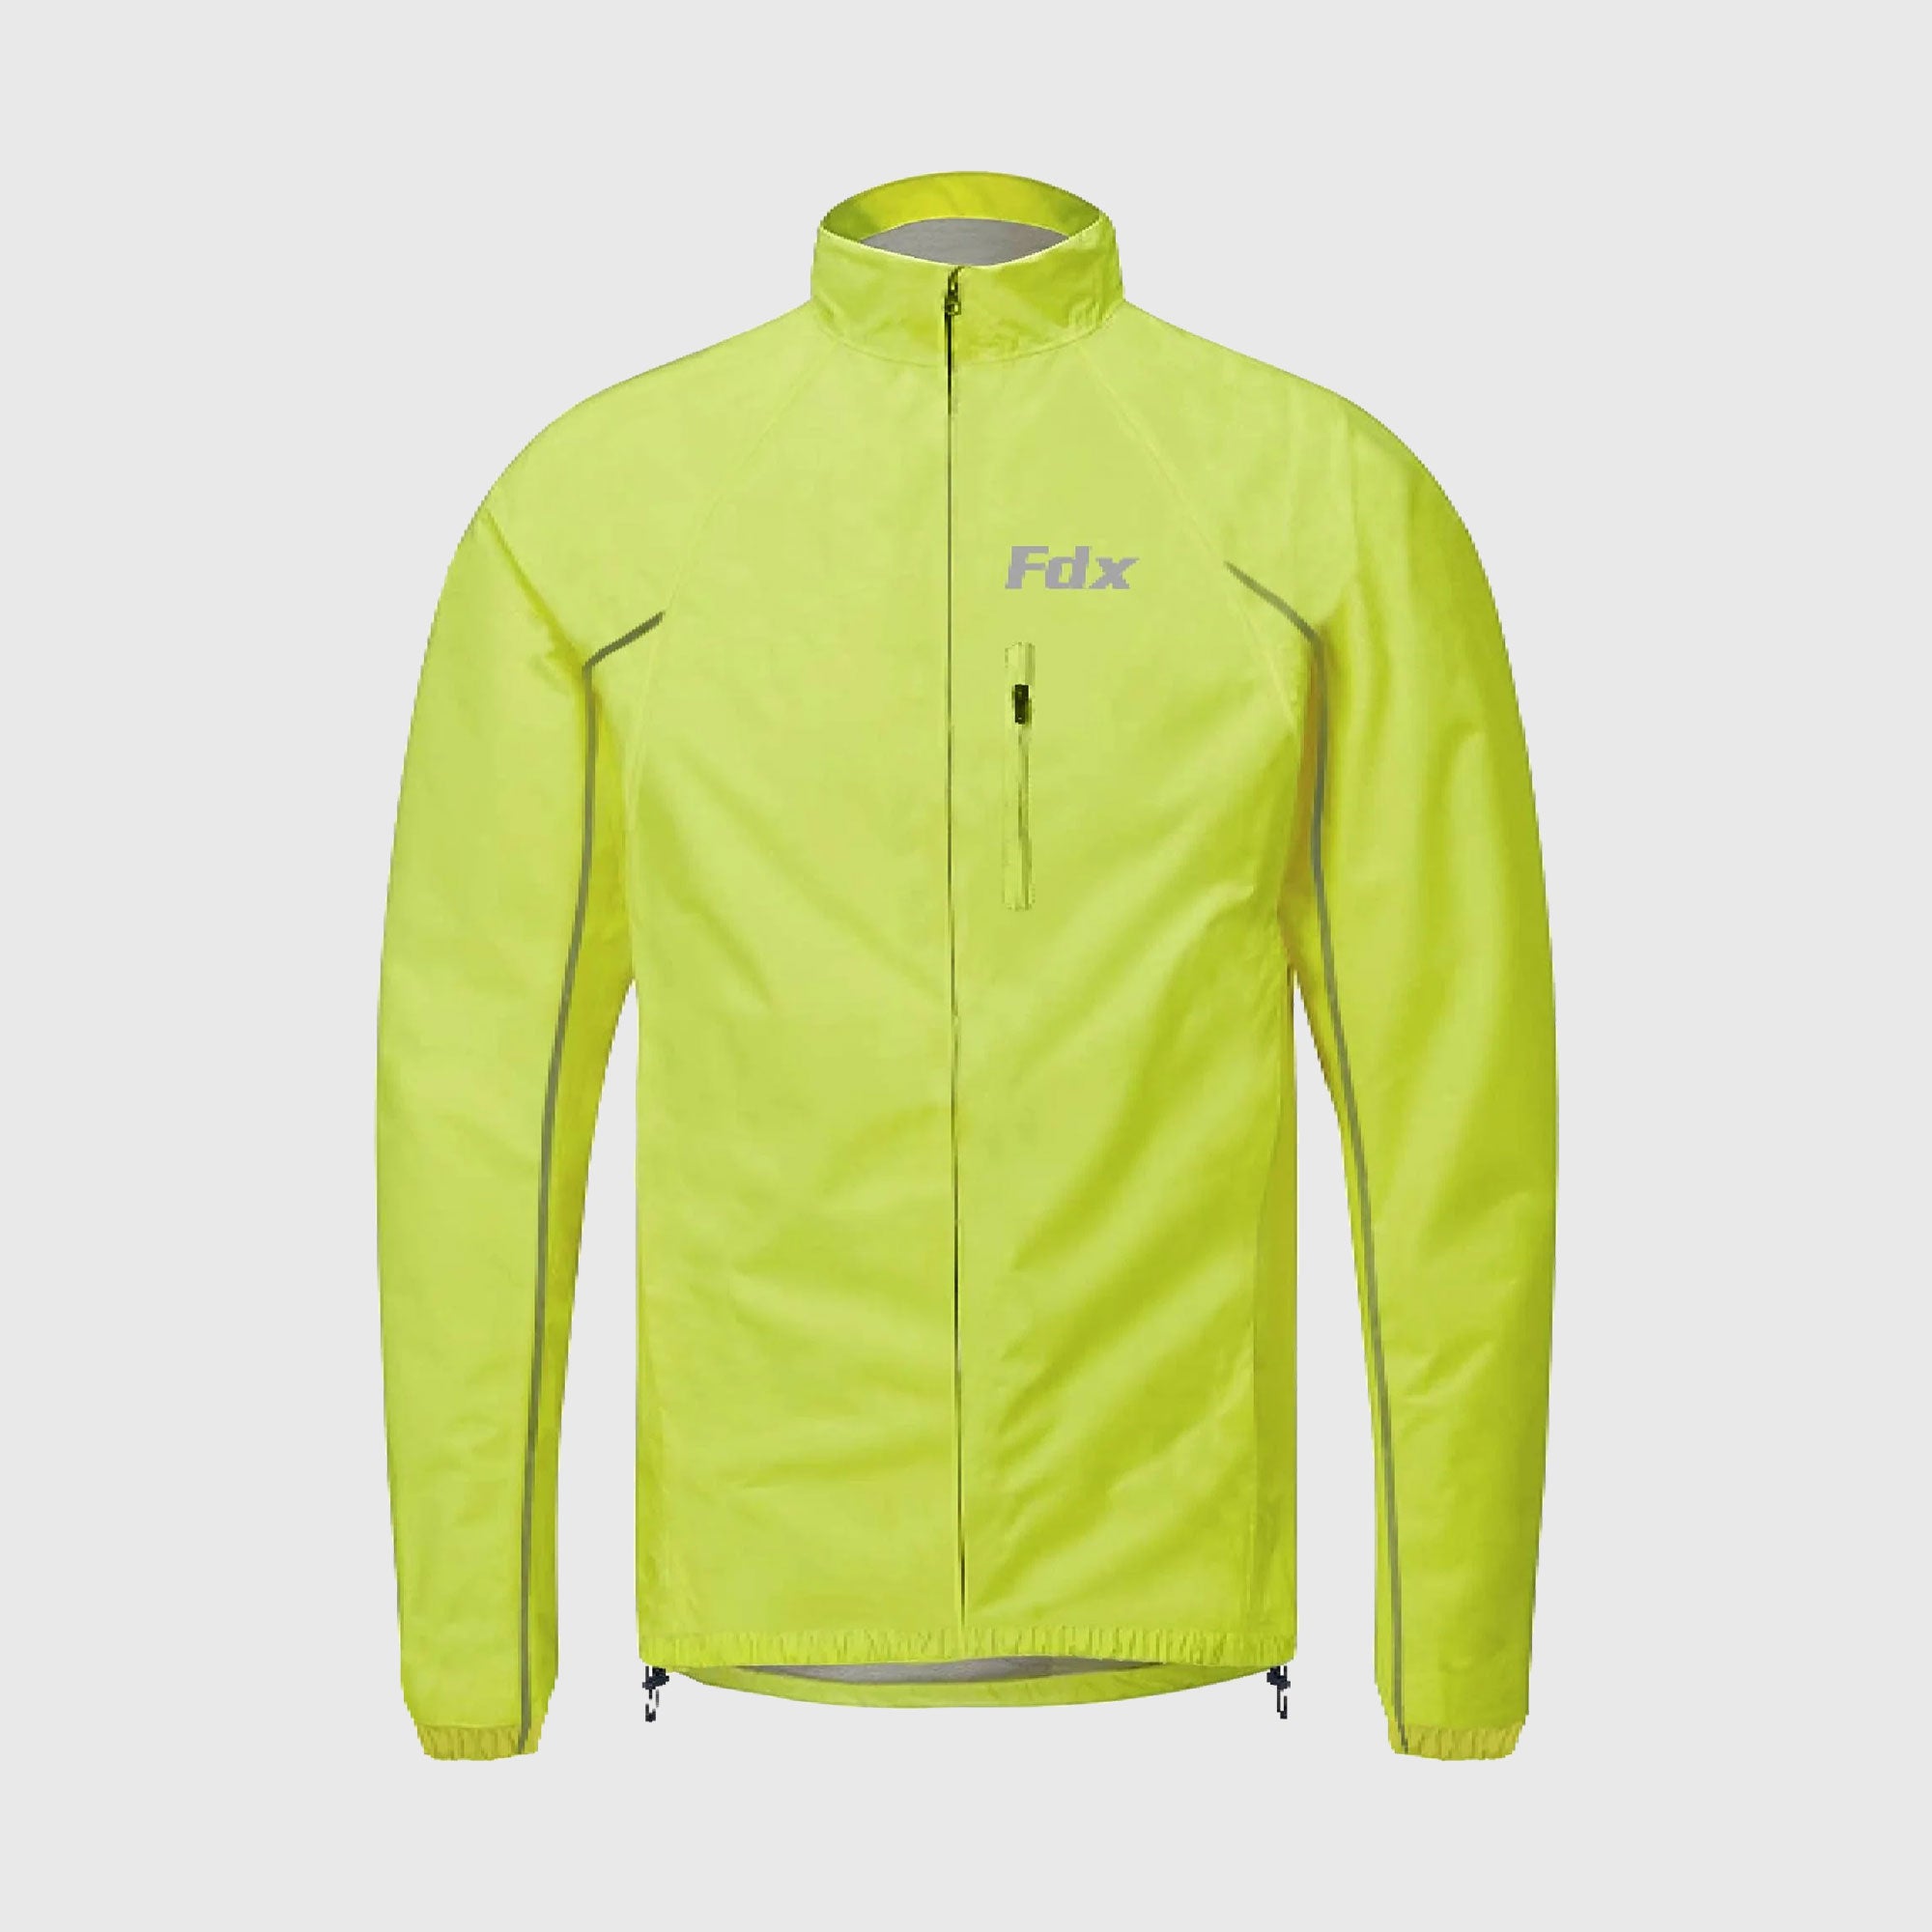 Fdx Men's Yellow Cycling Jacket for Winter Thermal Casual Softshell Clothing Lightweight, Shaverproof, Packable ,Windproof, Waterproof & Pockets - Defray